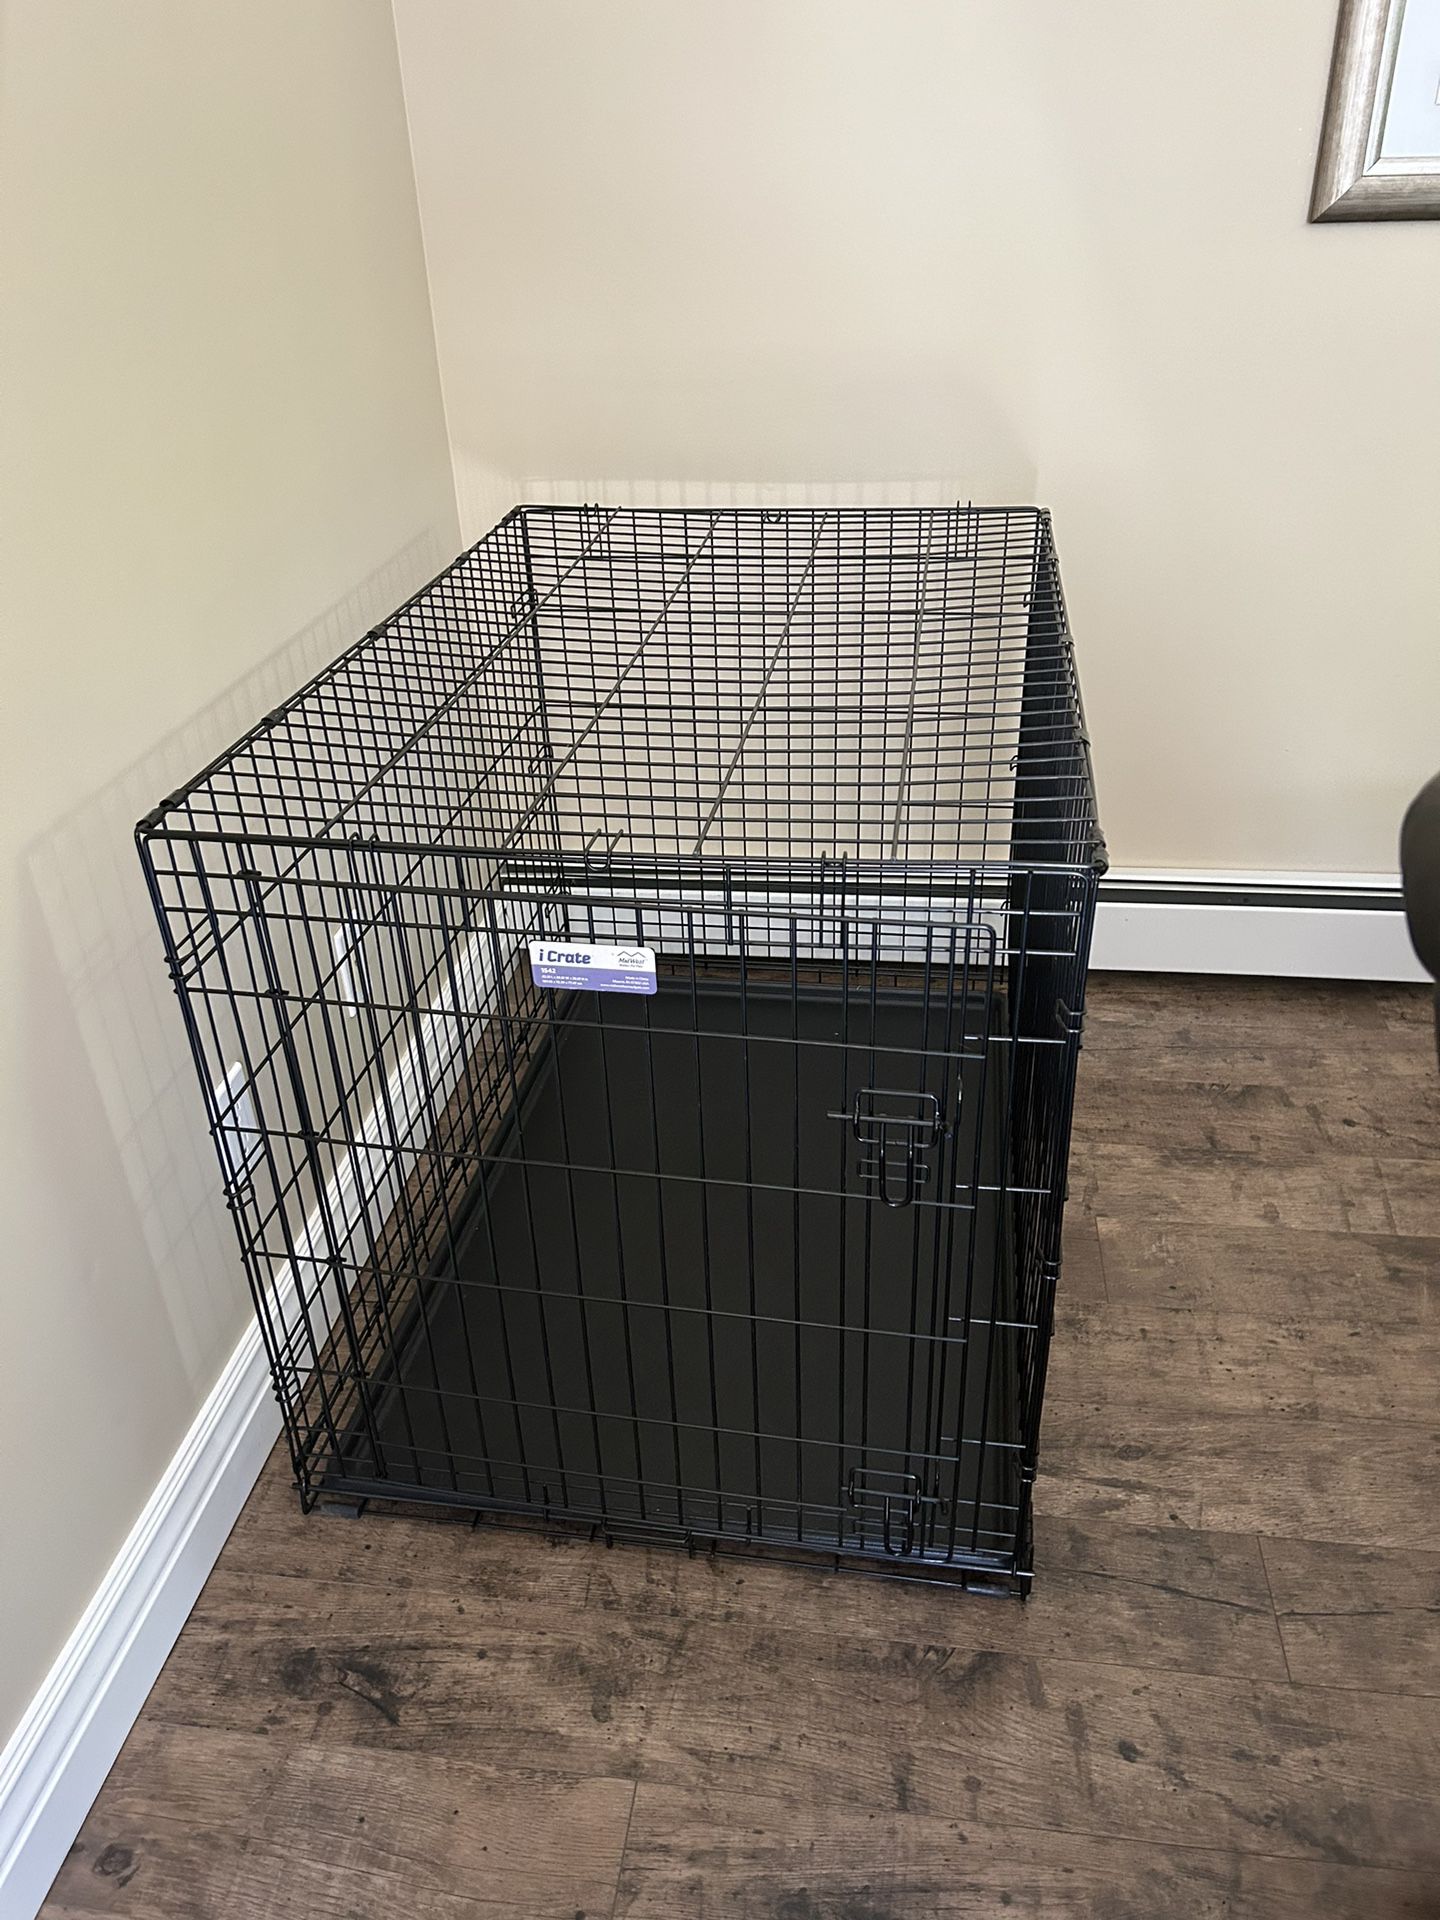 Large Dog Crate. Practically New